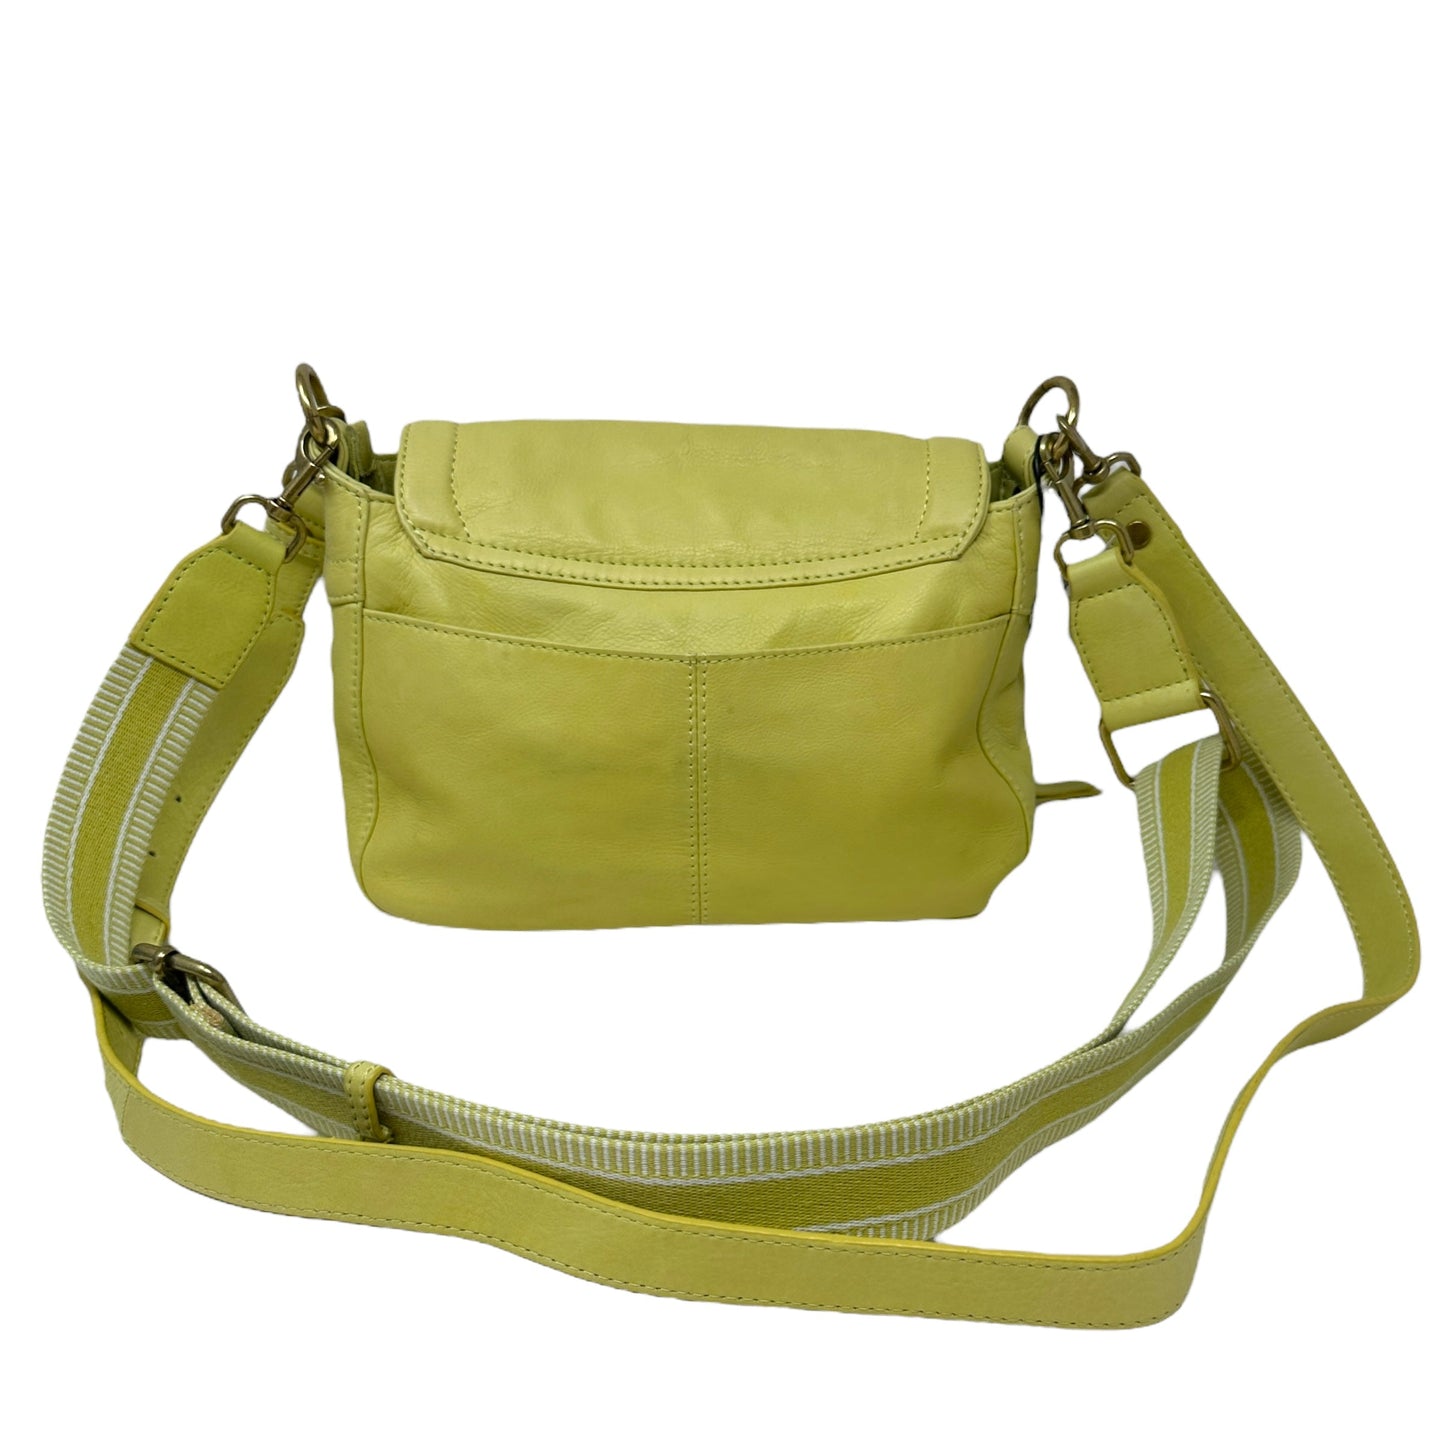 Multifunctional Leather Crossbody With 2 Straps - Citrus Smooth By American Leather Company   Size: Medium